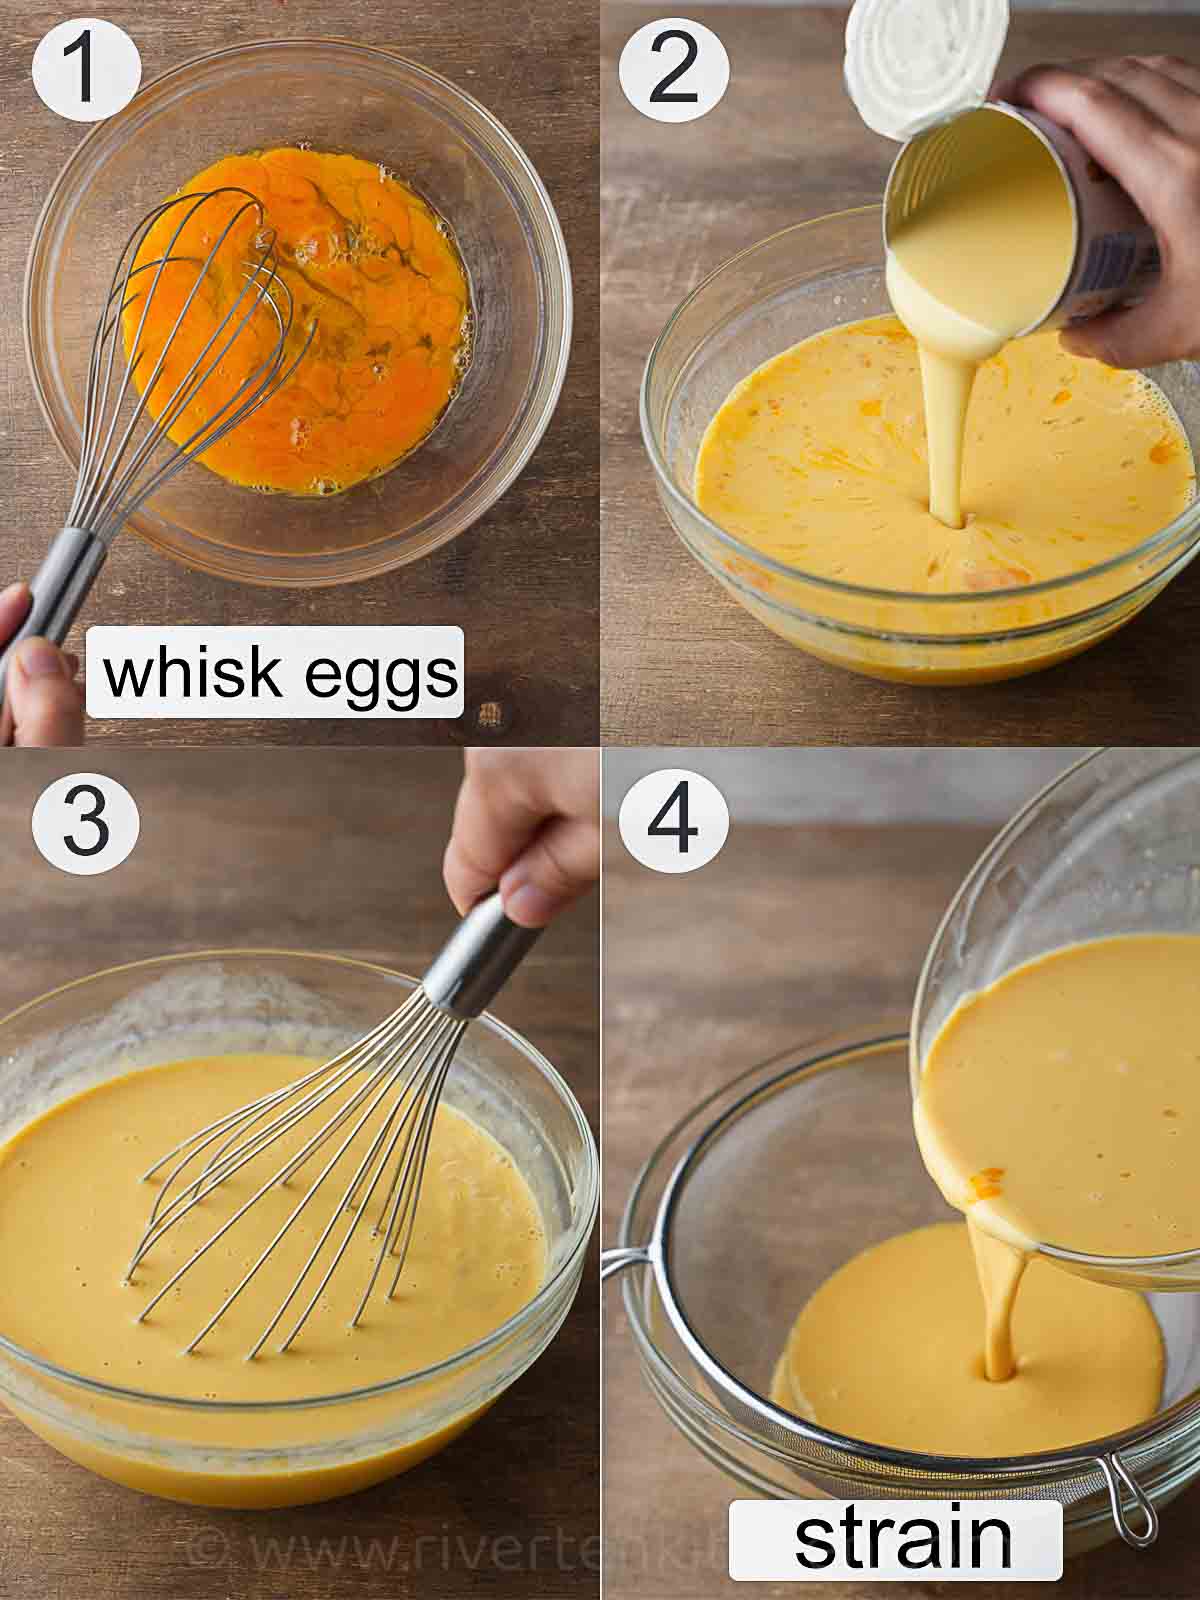 step-by-step process on how to make leche flan using whole eggs.